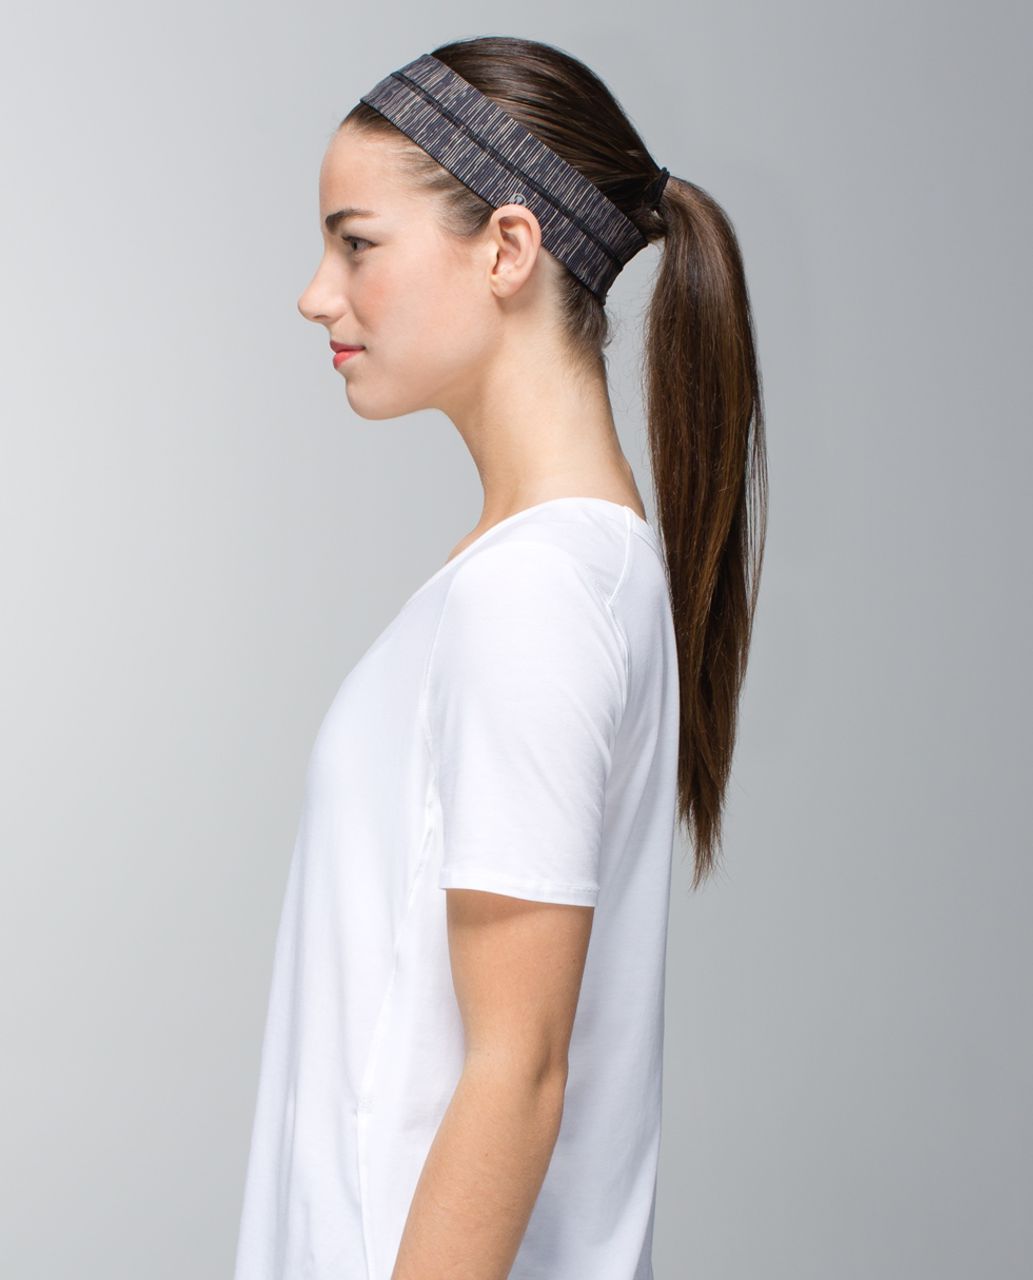 Lululemon Fly Away Tamer Headband - Wee Are From Space Black Cashew